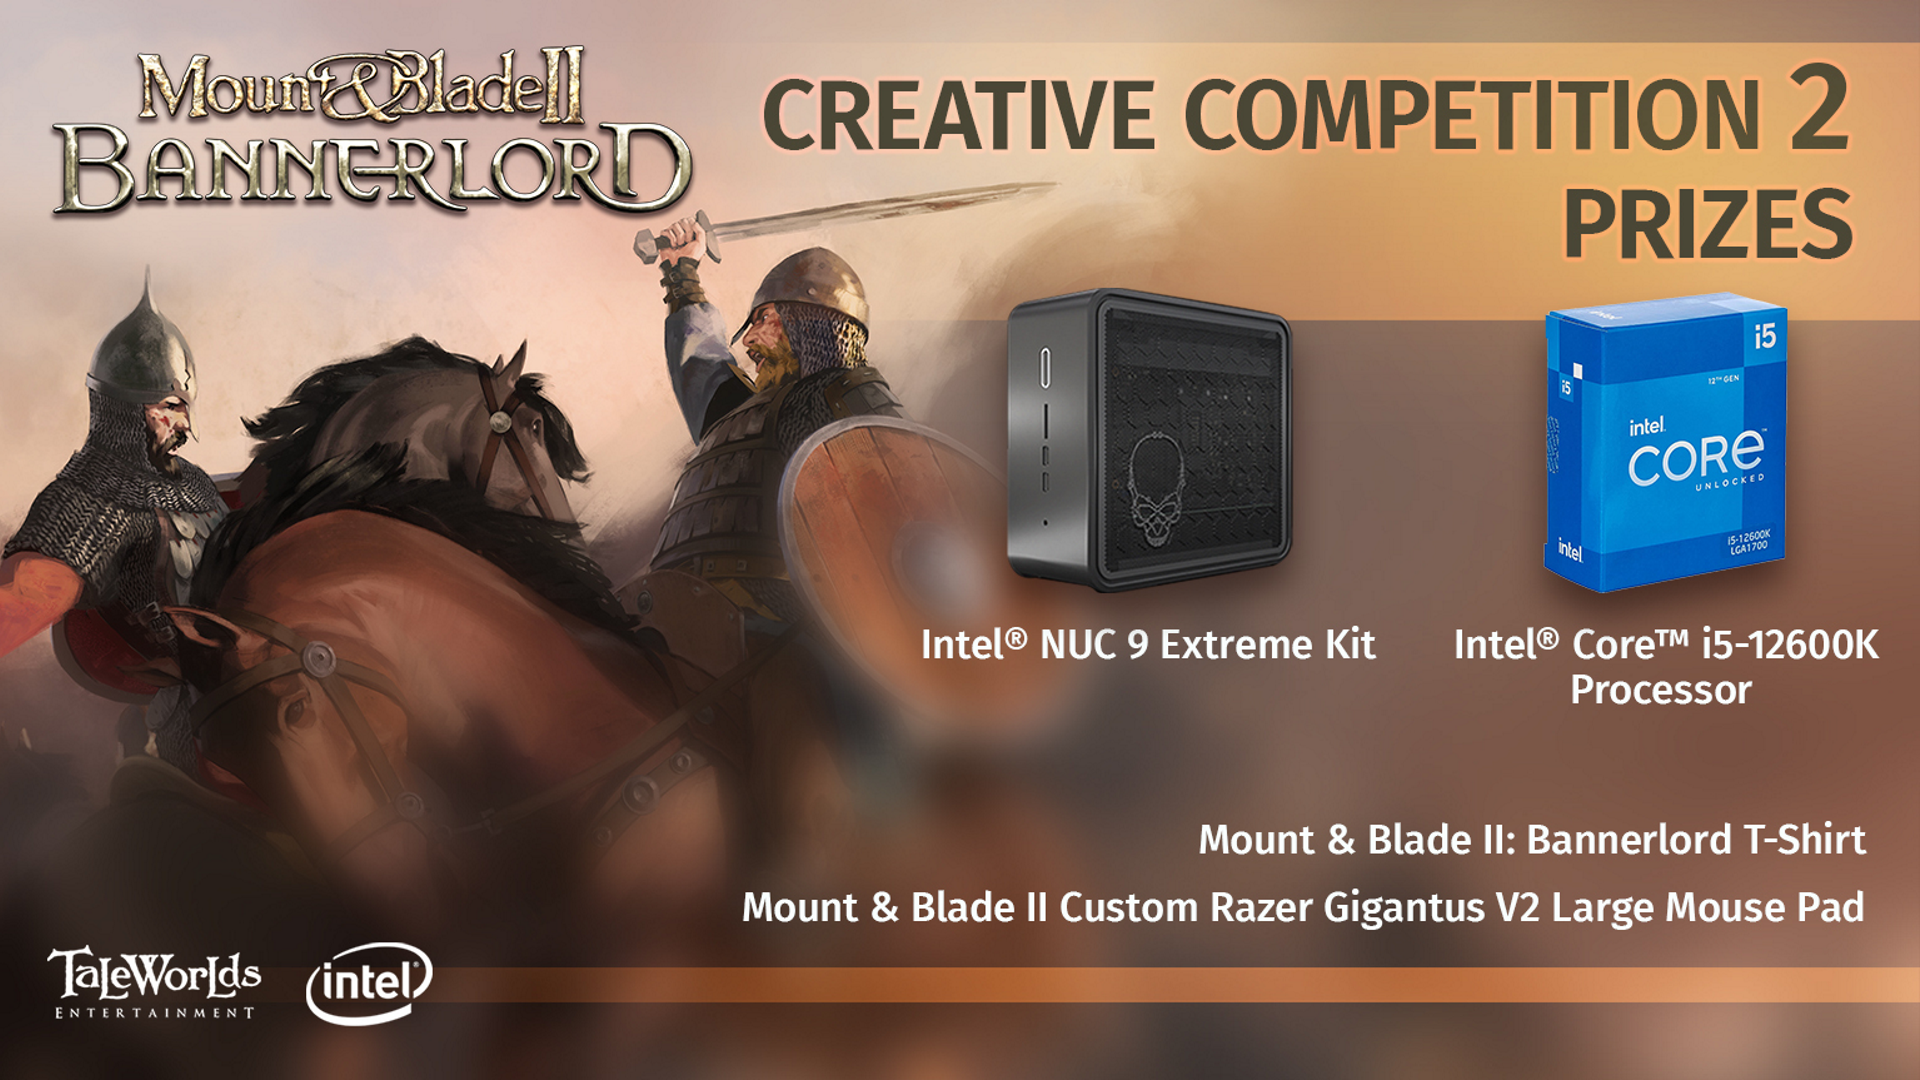 Bannerlord%20Creative%20Competition_prizes.png